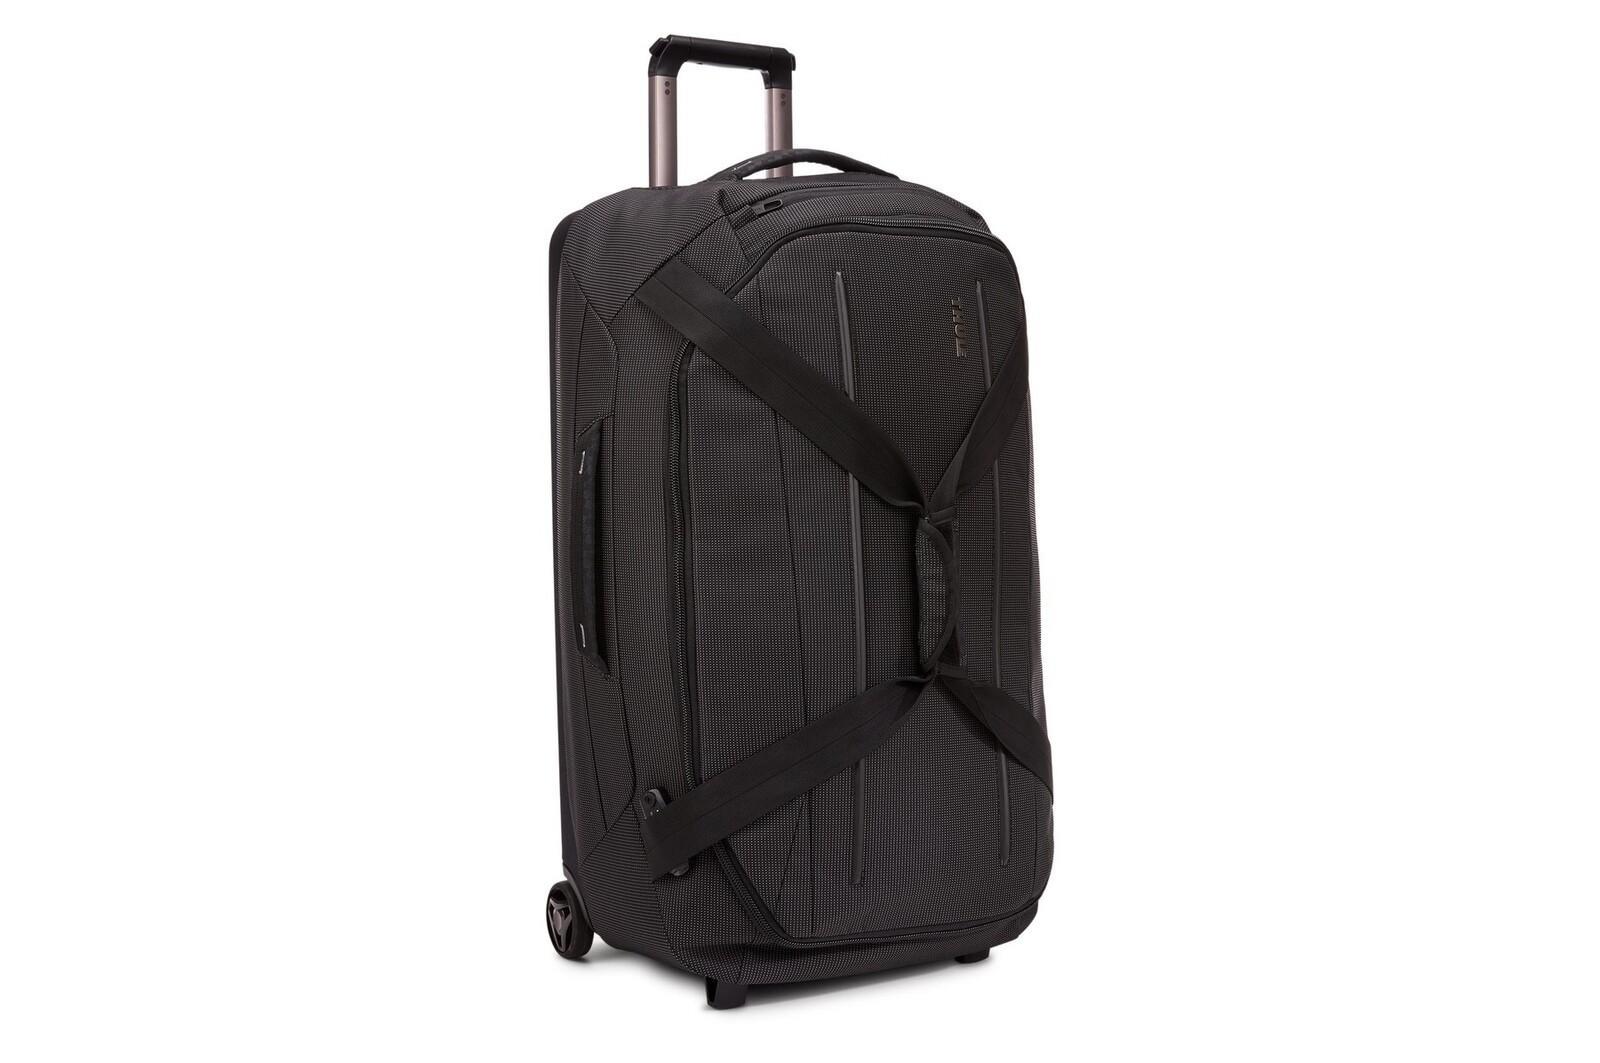 Thule Crossover2 76cm/87L Wheeled Duffel Travel Luggage Trolley Suitcase Black